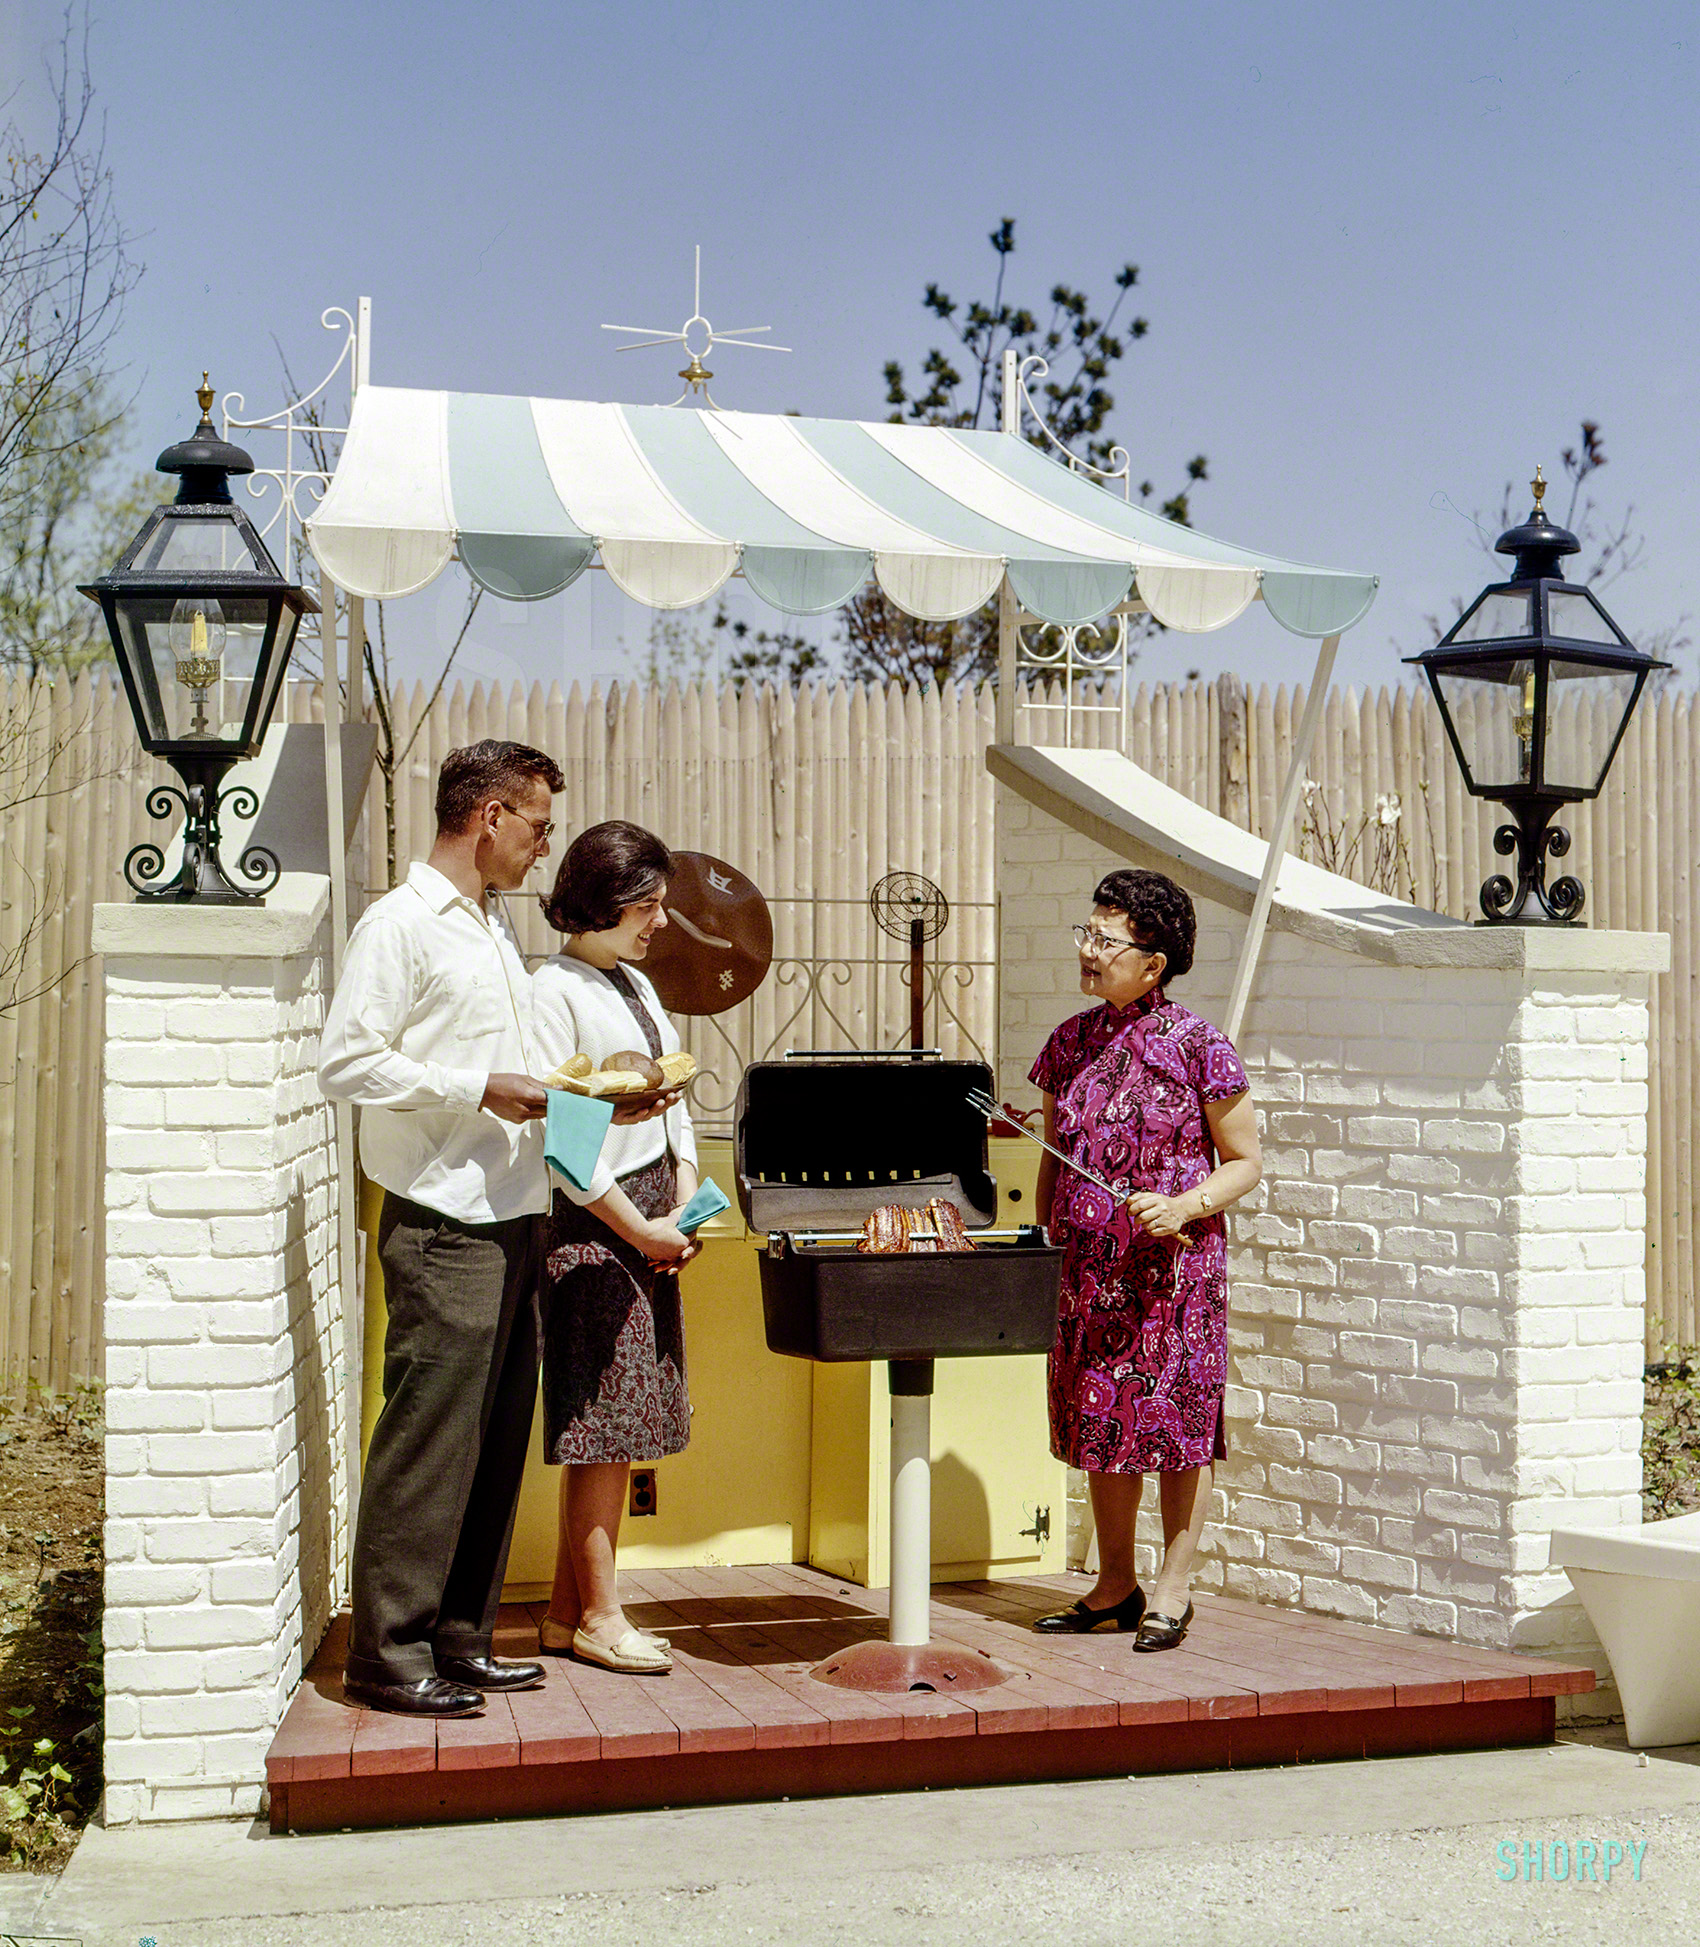 May 6, 1965. "World's Fair, Flushing, Long Island. Robert & Frances Vargo from Verplanck, N.Y., with Madame Grace Zia Chu, cooking Chinese Spare Ribs at Festival of Gas." Madame Grace, known as the "First Lady of Chopsticks," was a sort of Asian Julia Child who did her best to explain that authentic Chinese cuisine relied on fresh ingredients that did not come from a can. 4x5 inch Ektachrome transparency from the Shorpy Publicity Department archive. View full size.